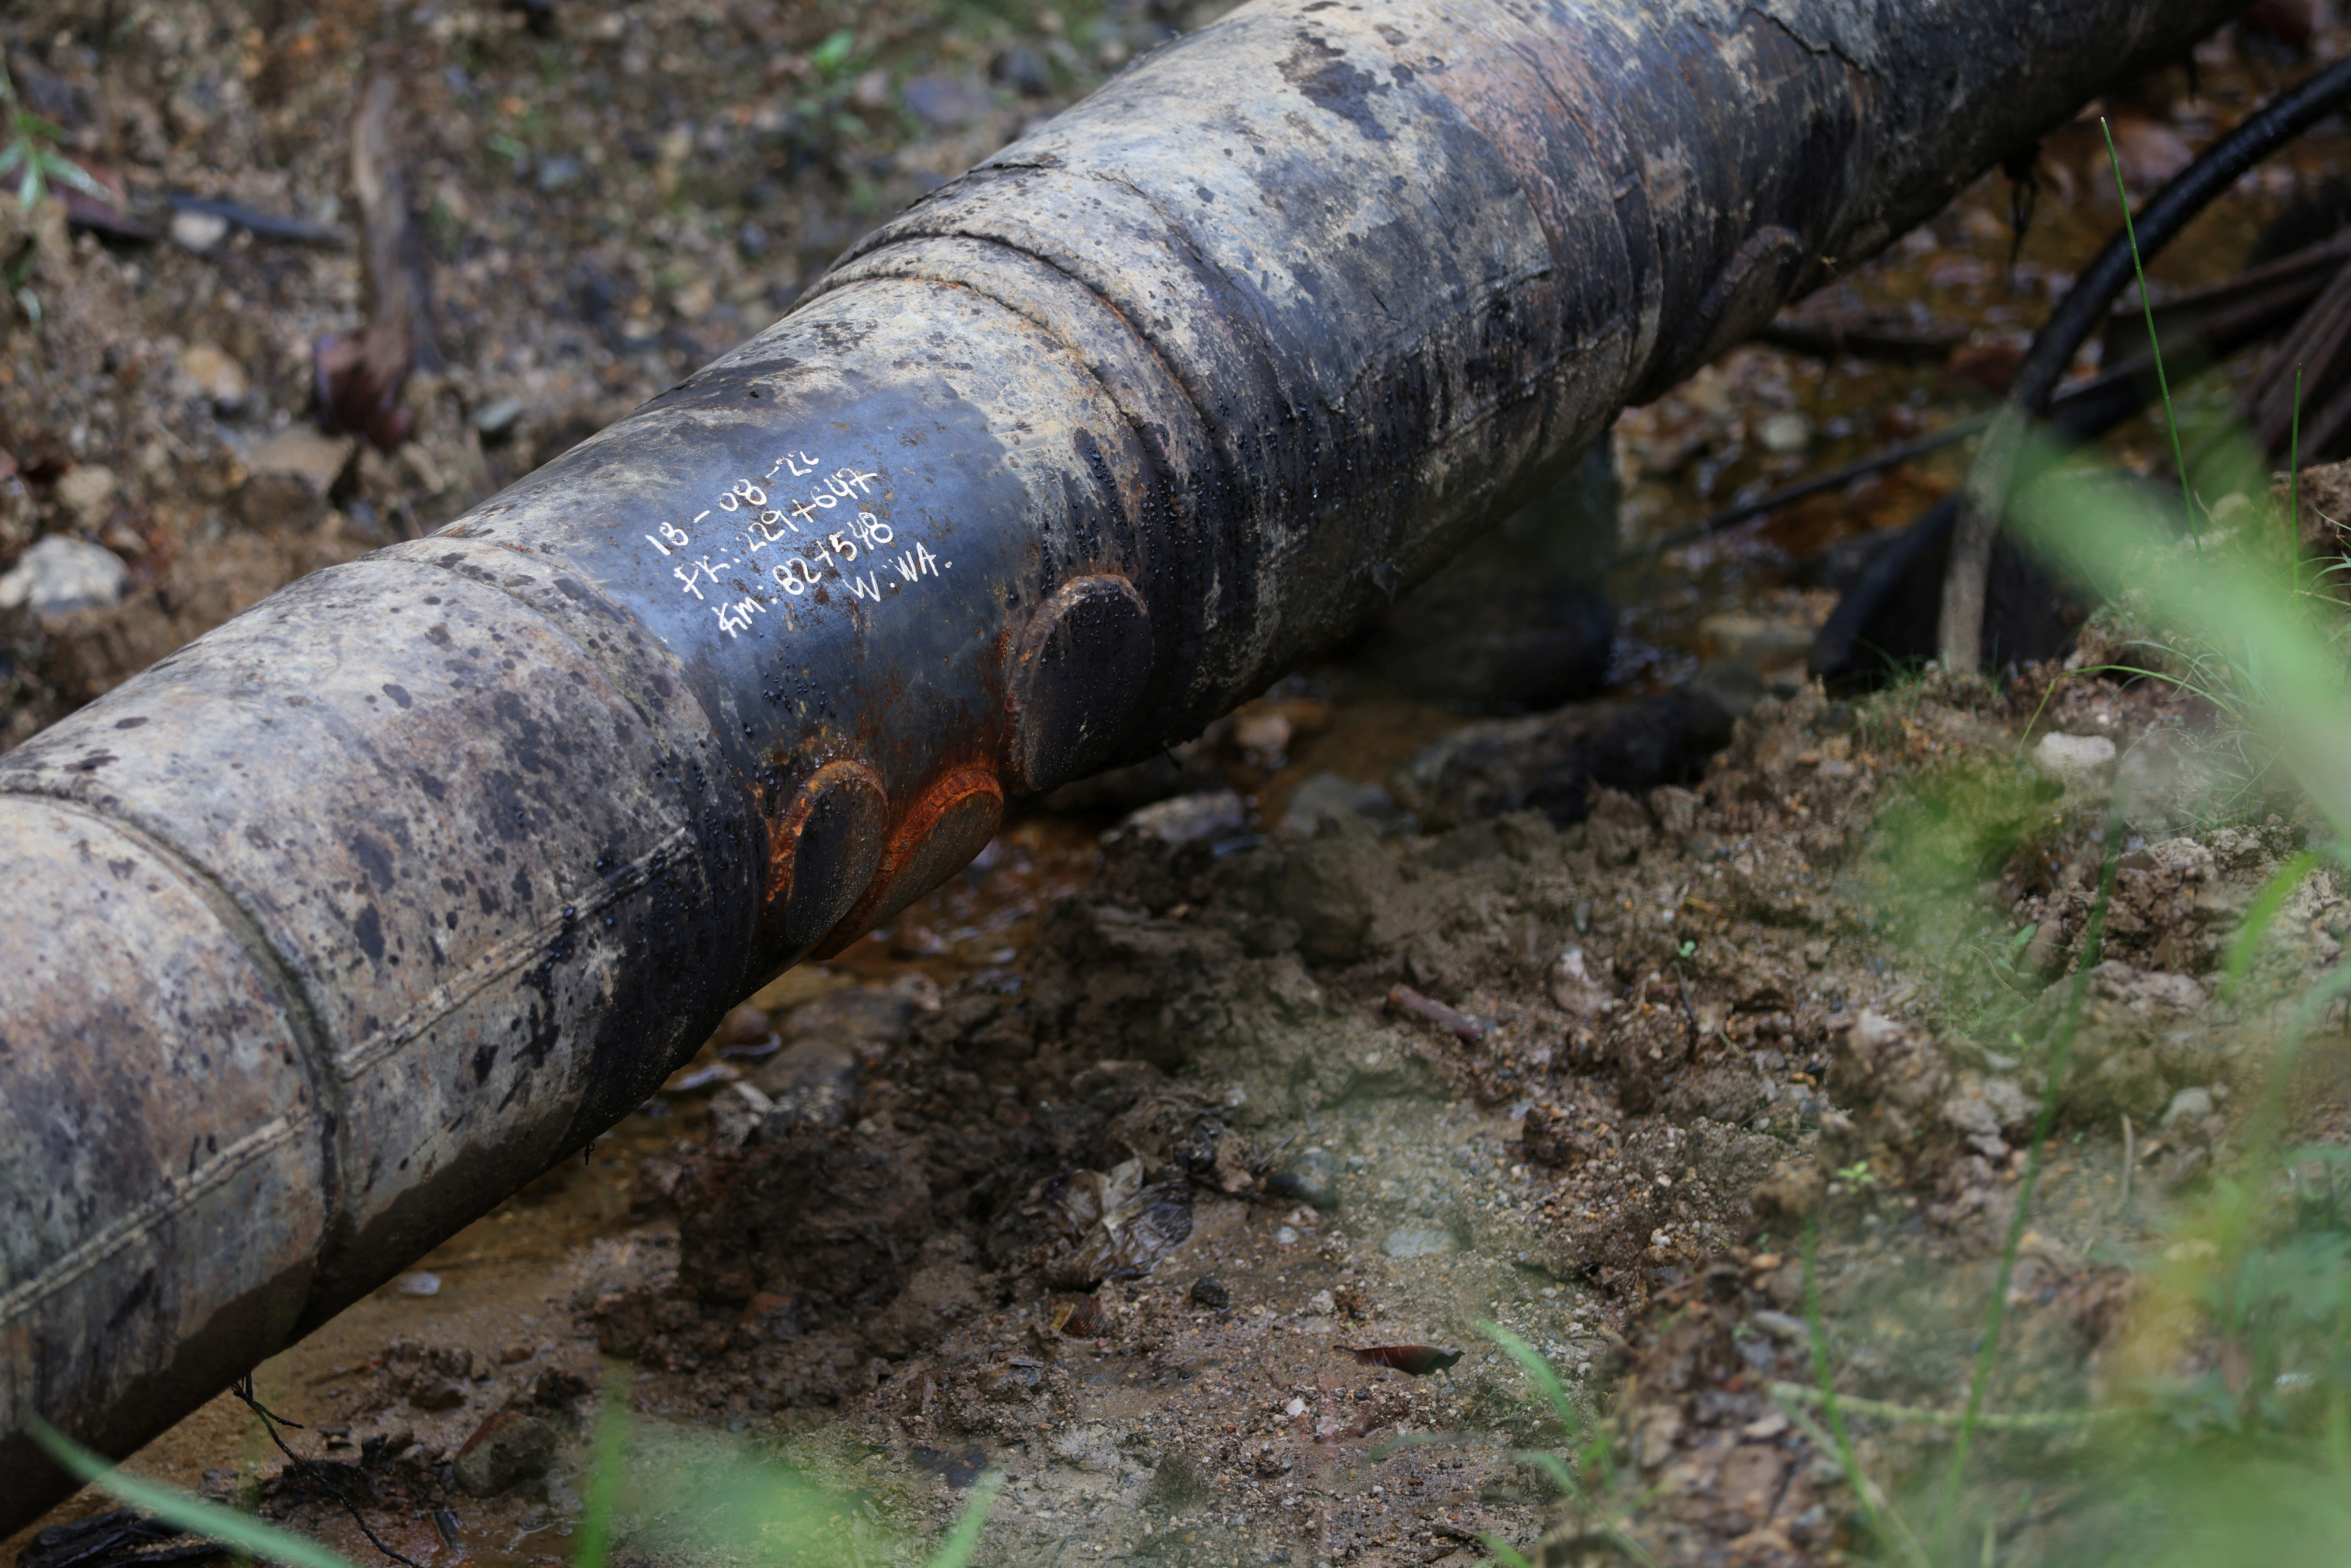 Clandestine oil theft for drug trafficking endangers the environment in Tumaco